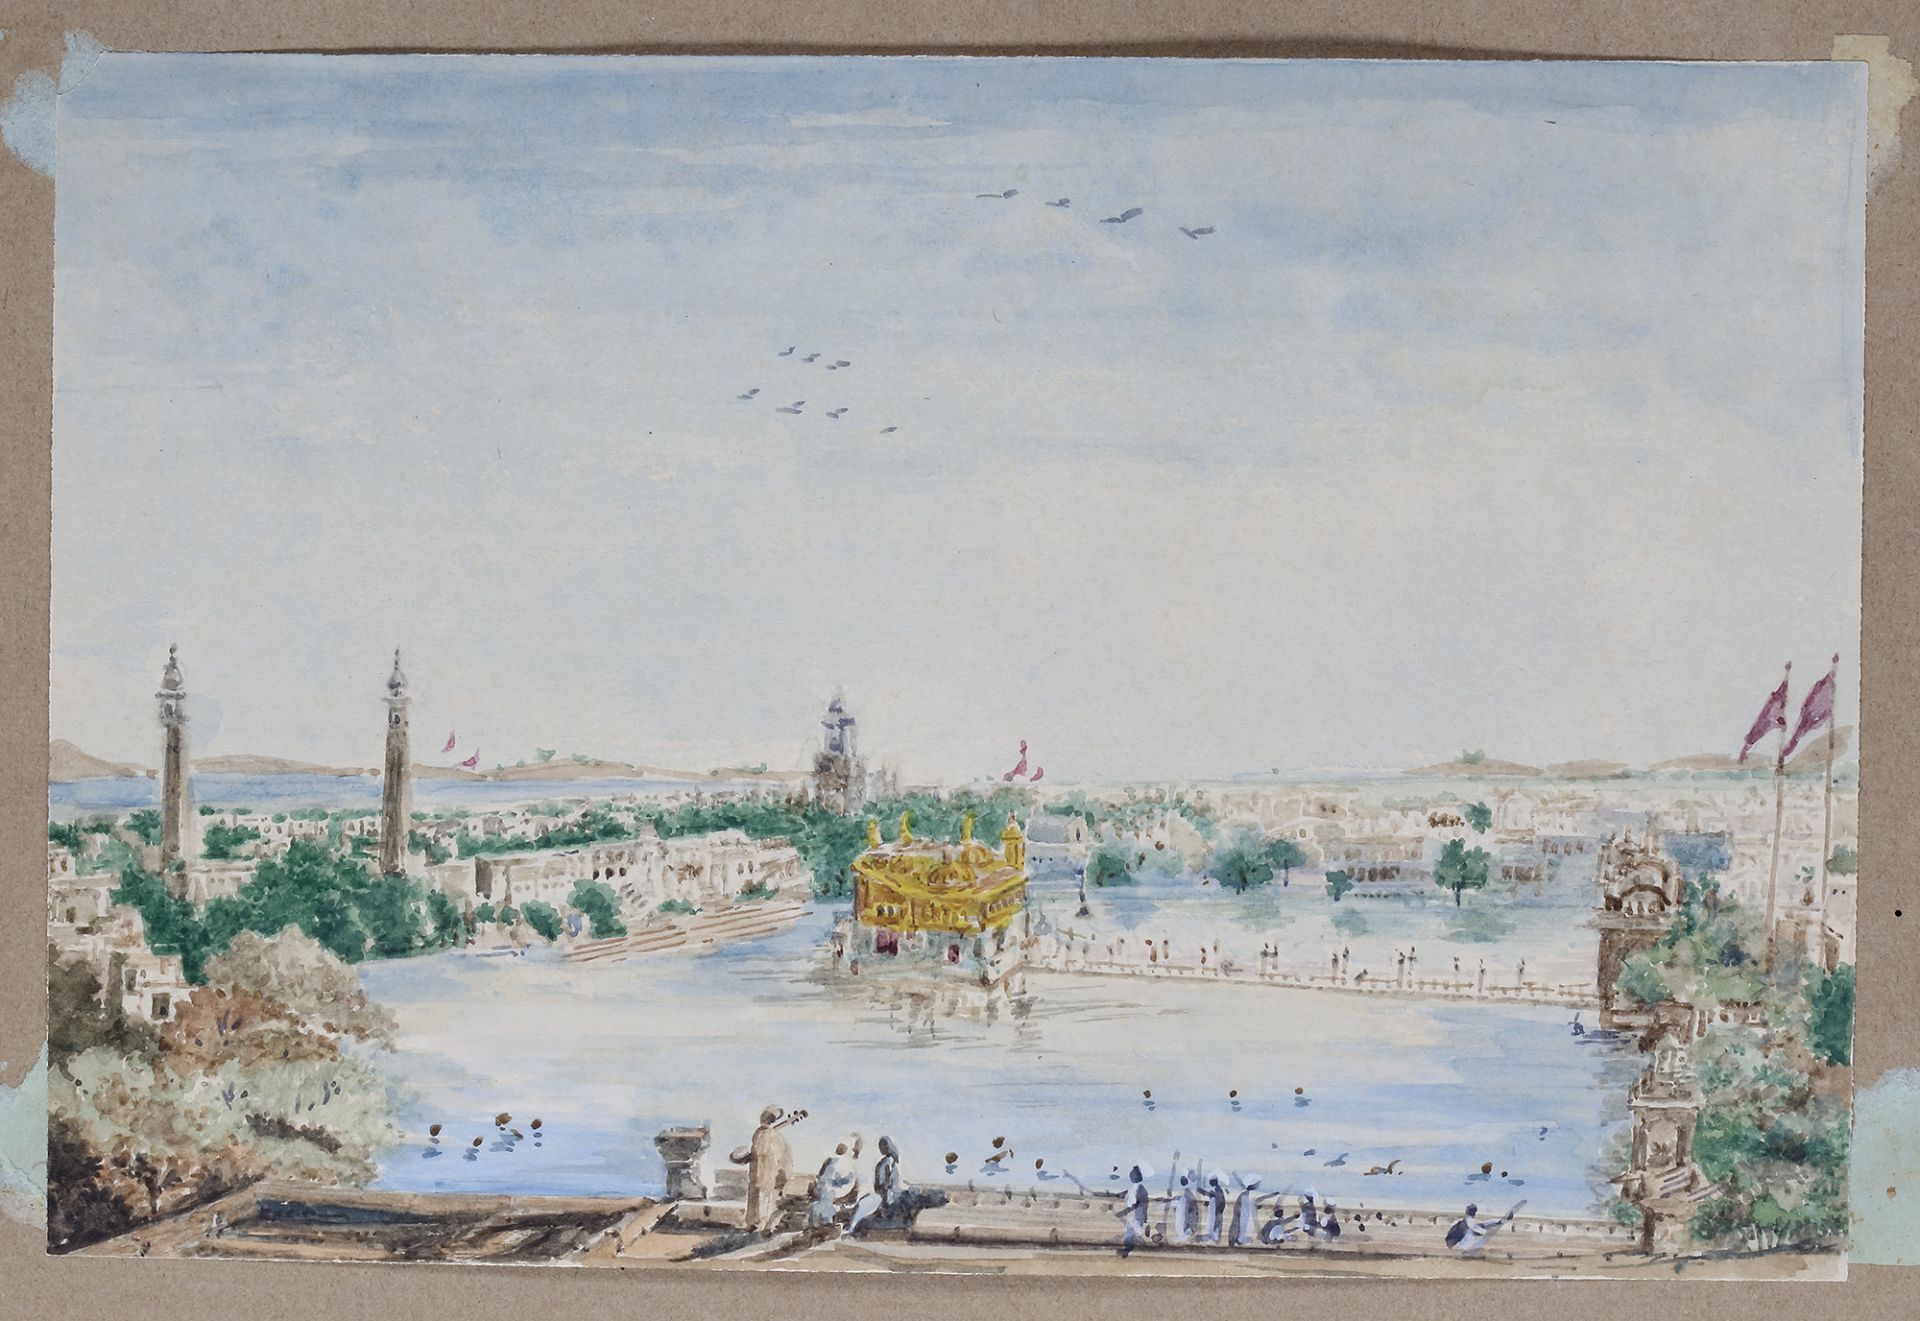 VIEWS OF THE GOLDEN TEMPLE AT AMRITSAR EUROPEAN SCHOOL, 19TH CENTURY - Image 7 of 10